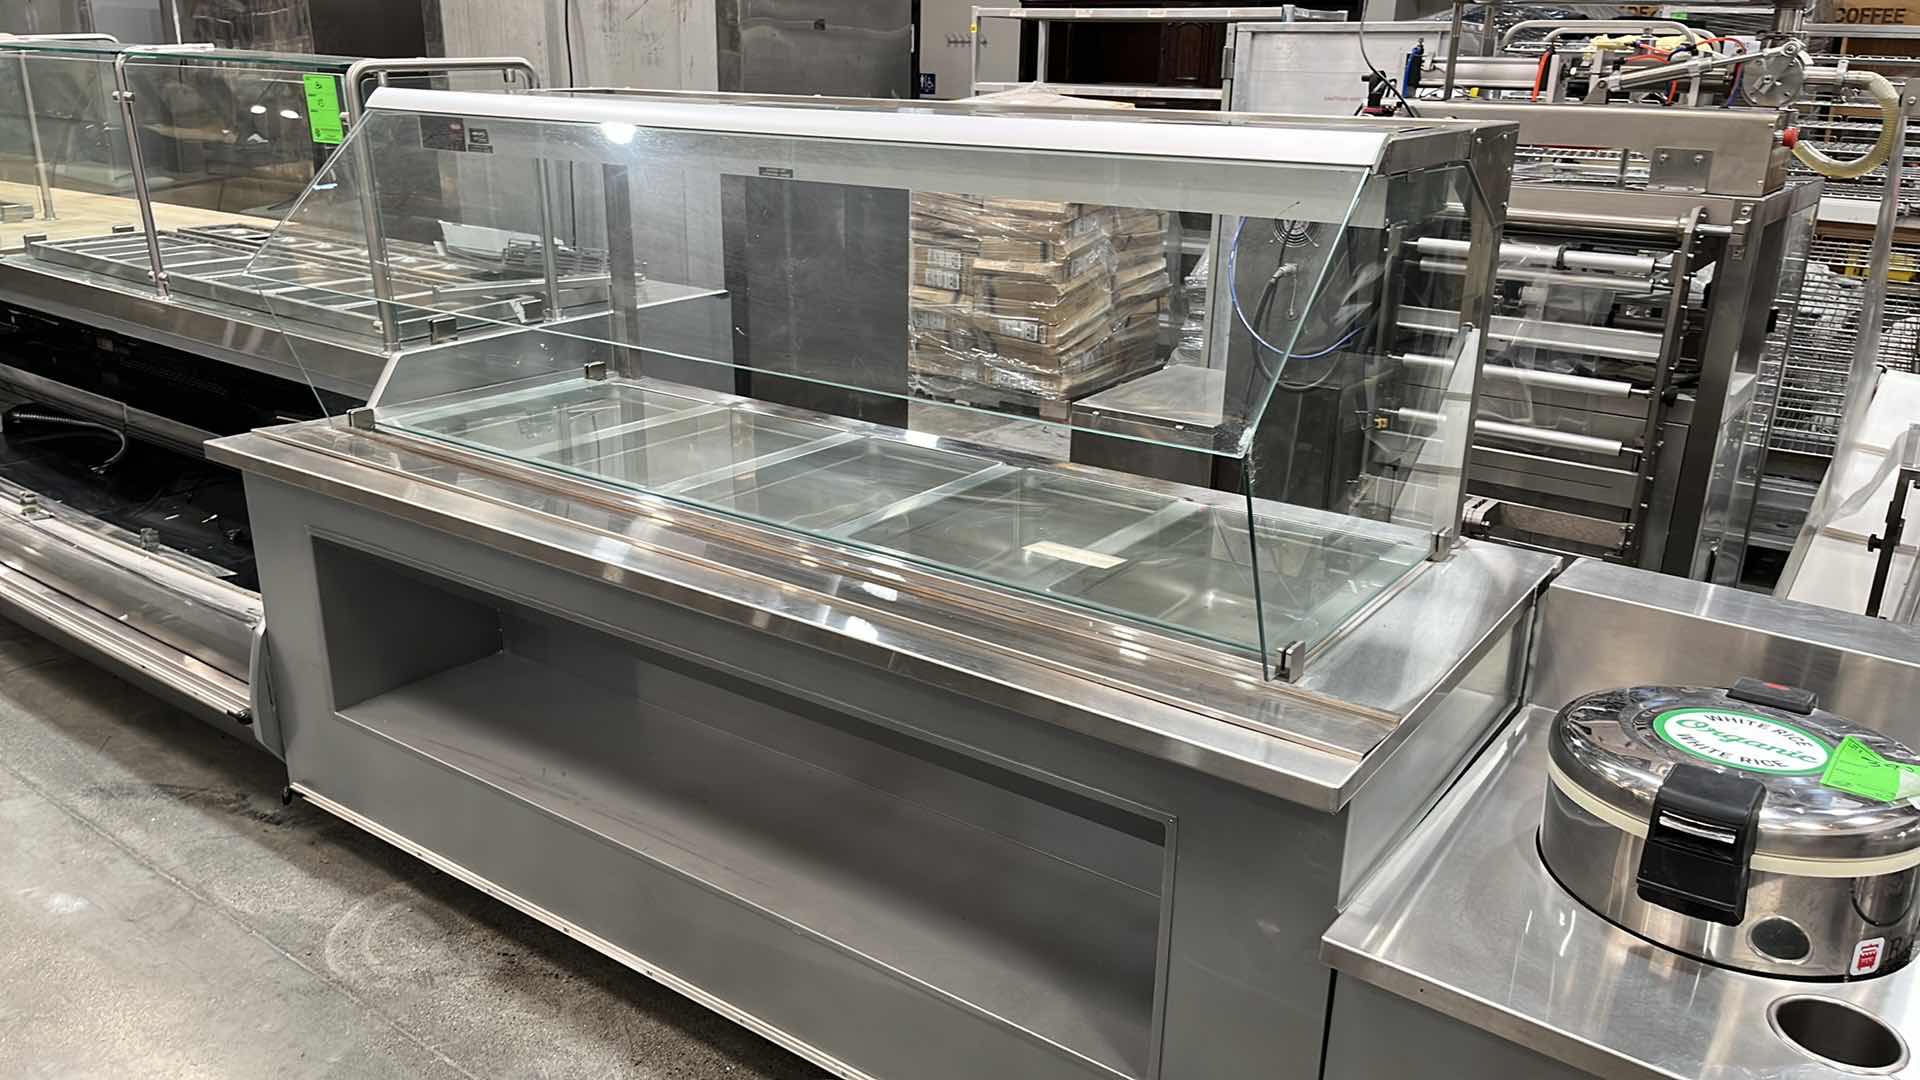 Photo 1 of HUSSMANN COMMERCIAL SELF-SERVICE FOOD COUNTER W HOT WELLS MODEL IM-05-I7-FH